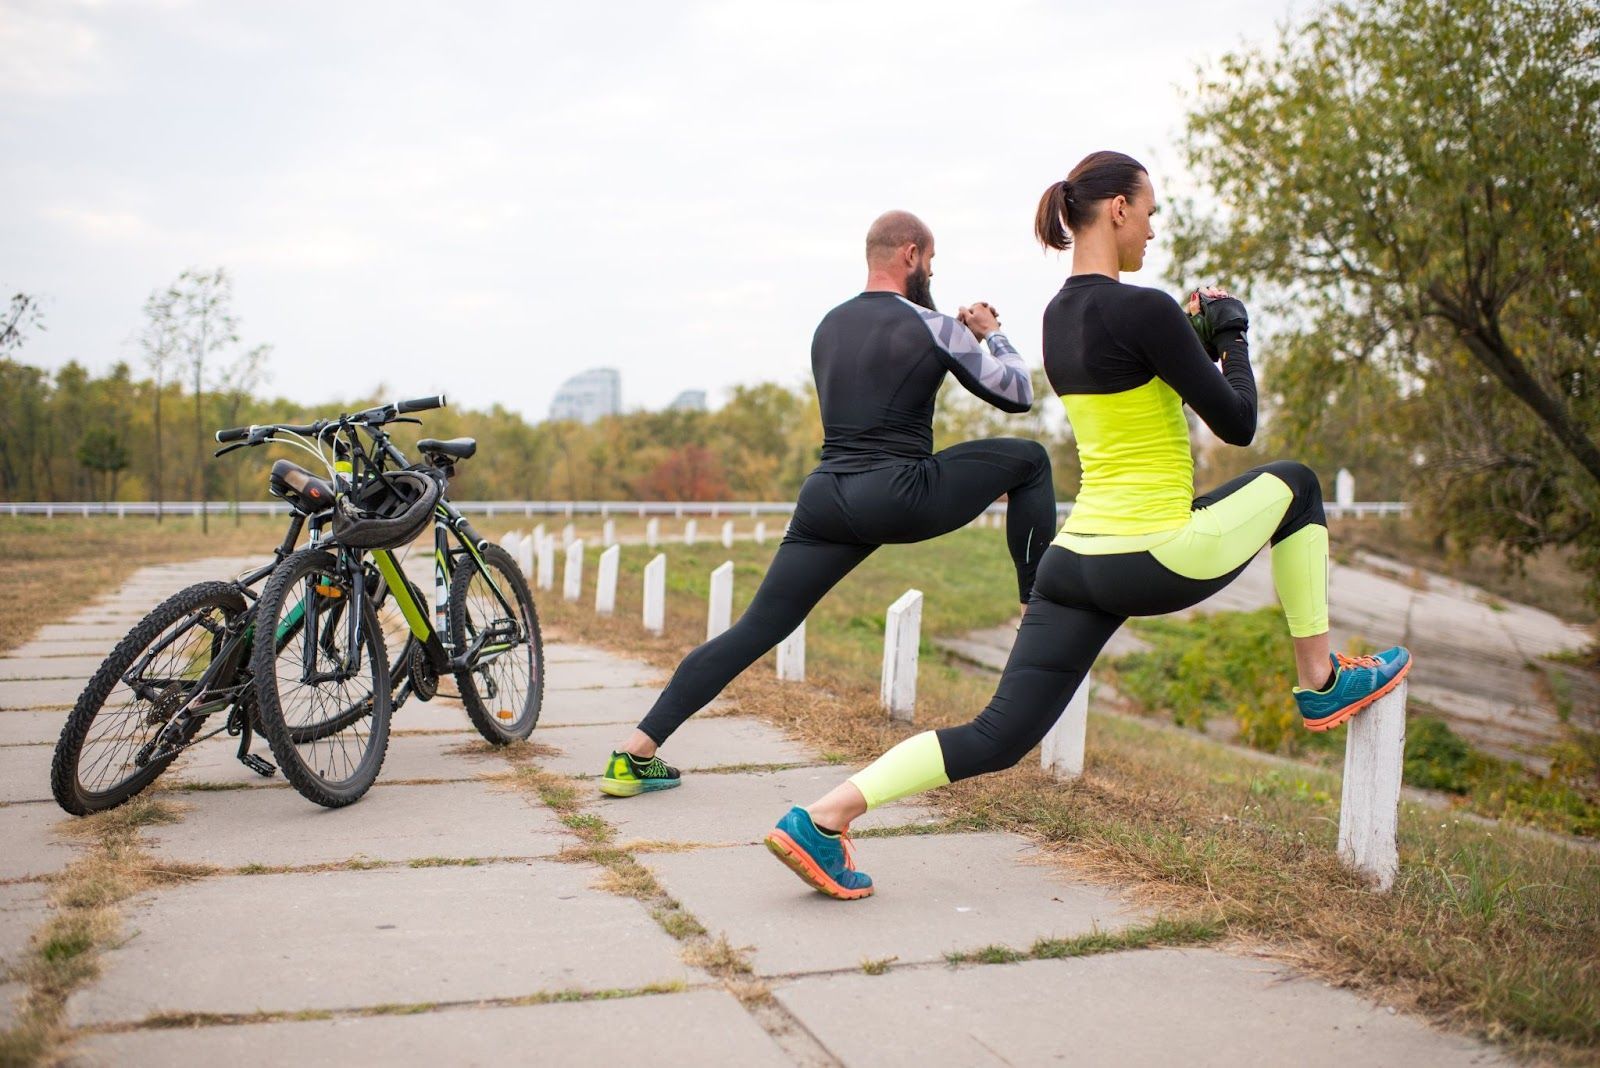 Two cyclists are doing warm-up stretches before a ride in the park.
